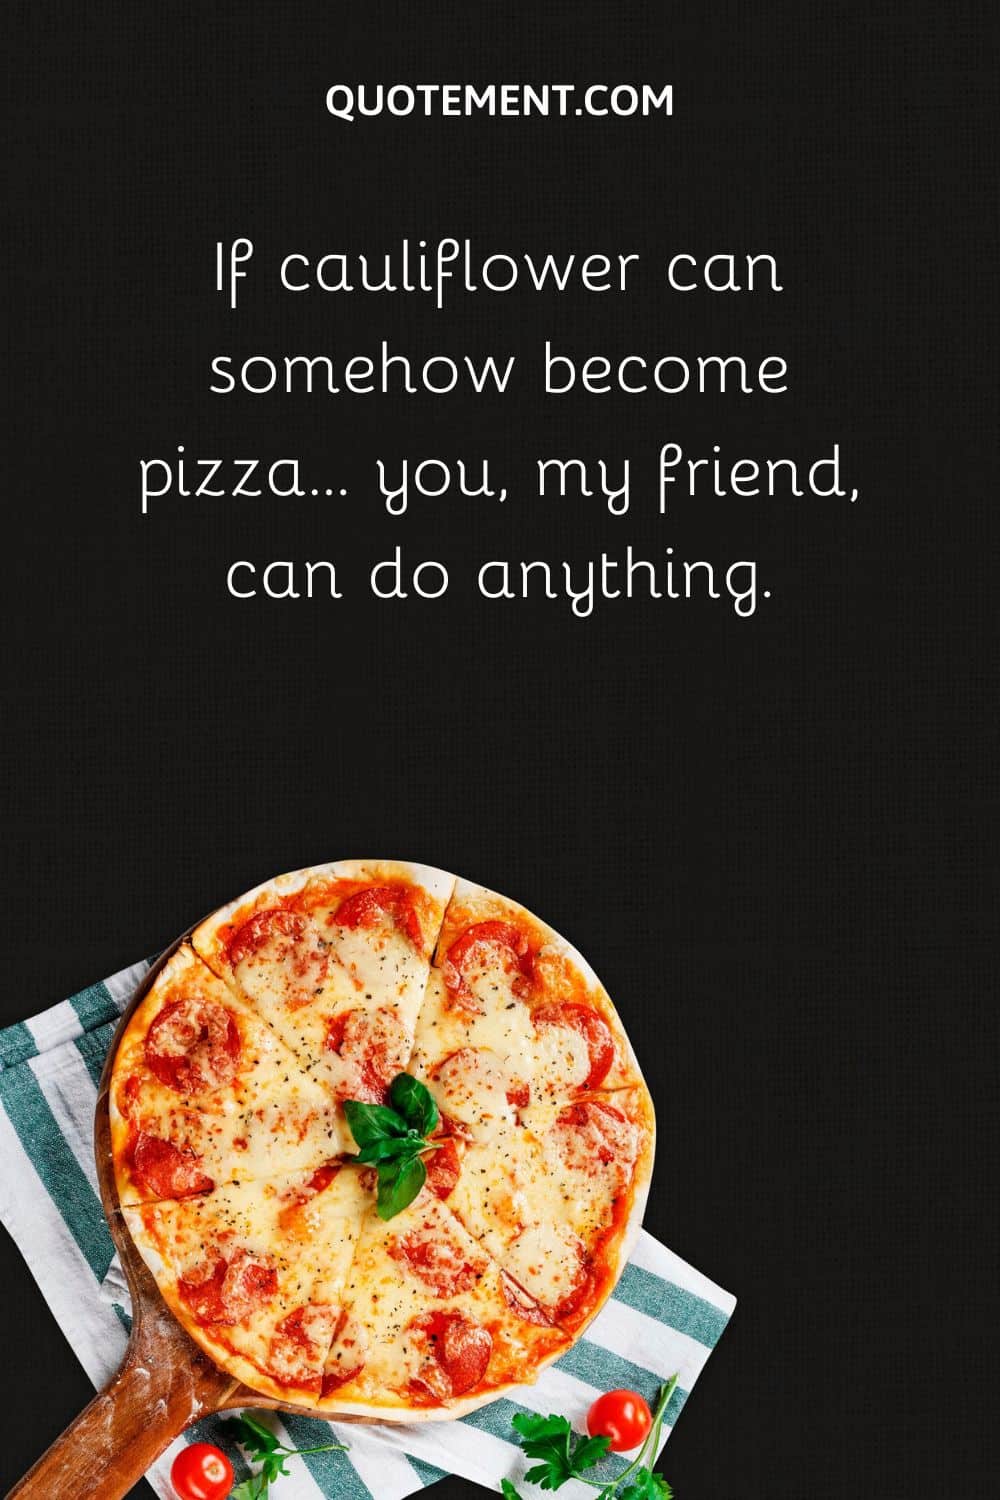 If cauliflower can somehow become pizza